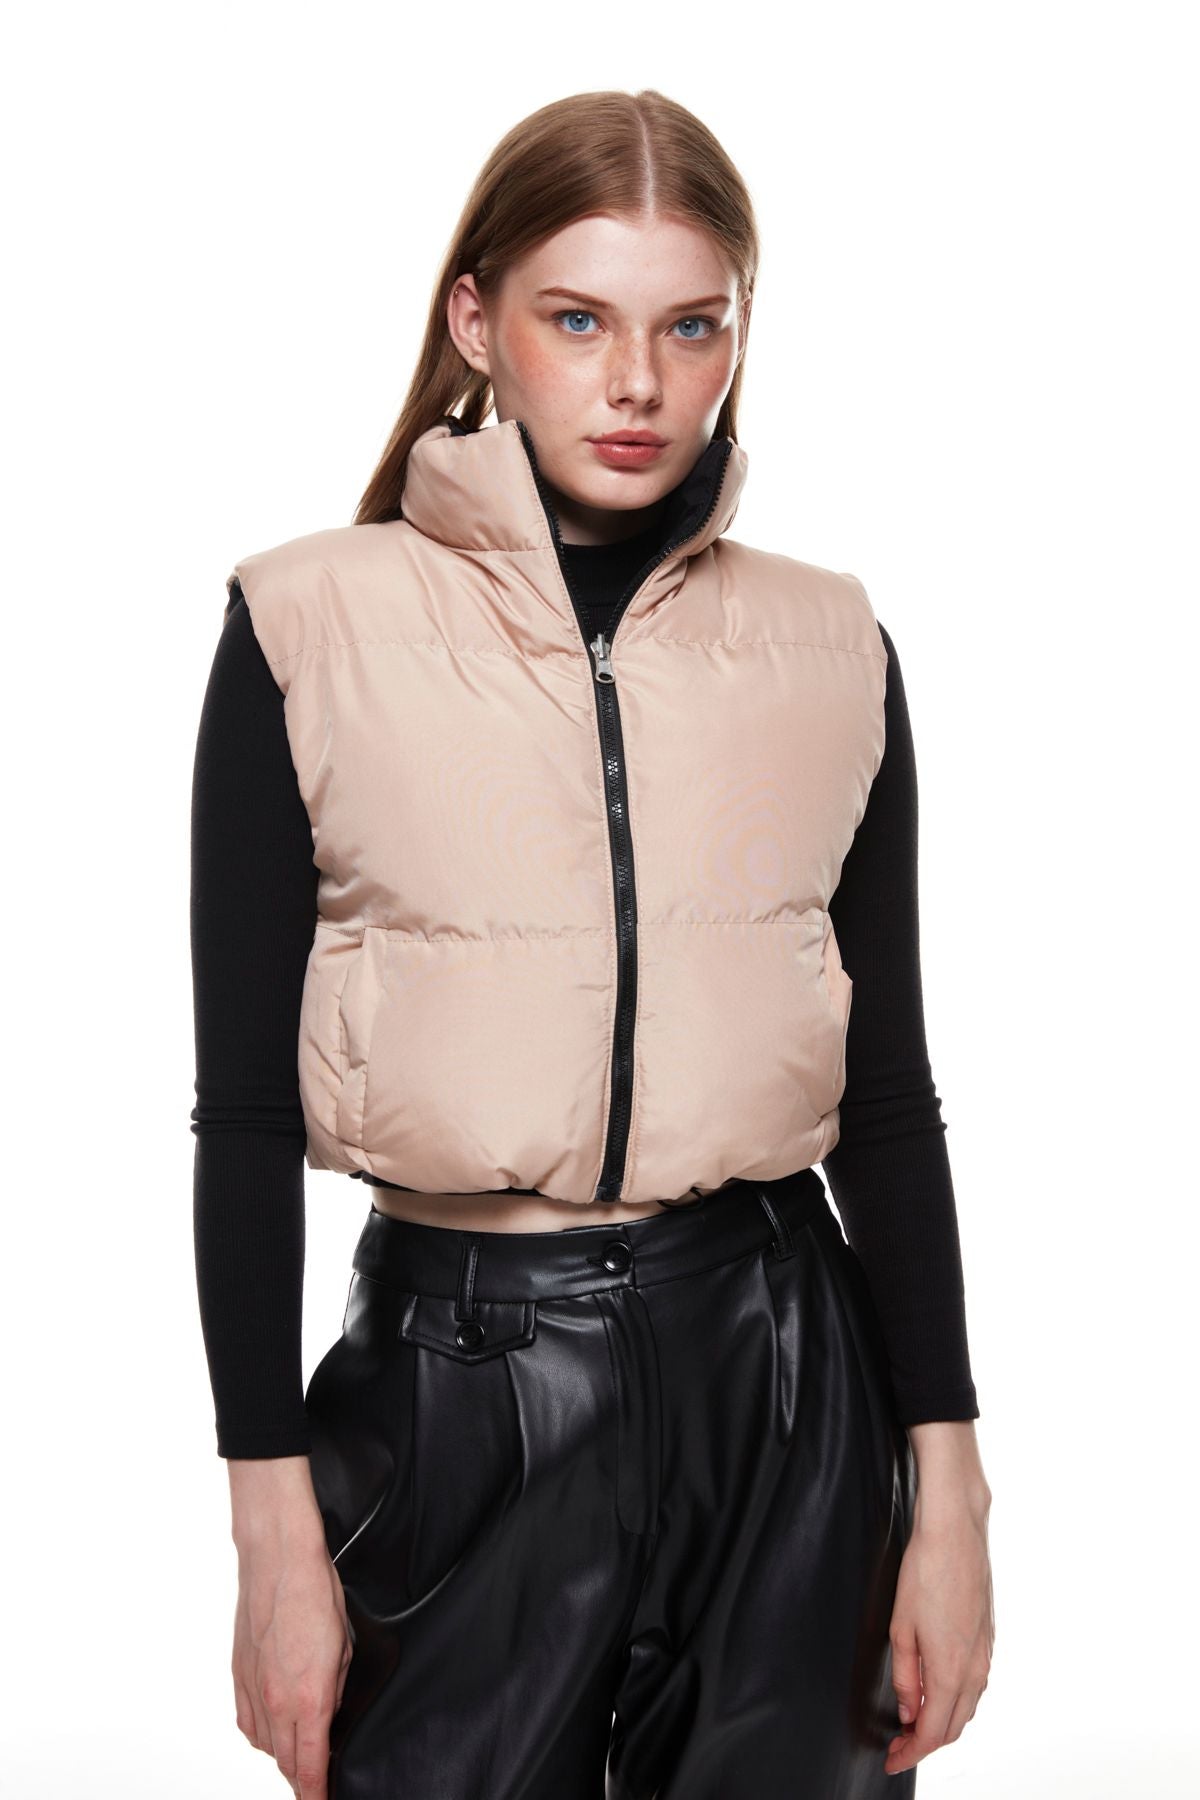 Double Sided Crop Puffer Vest Black